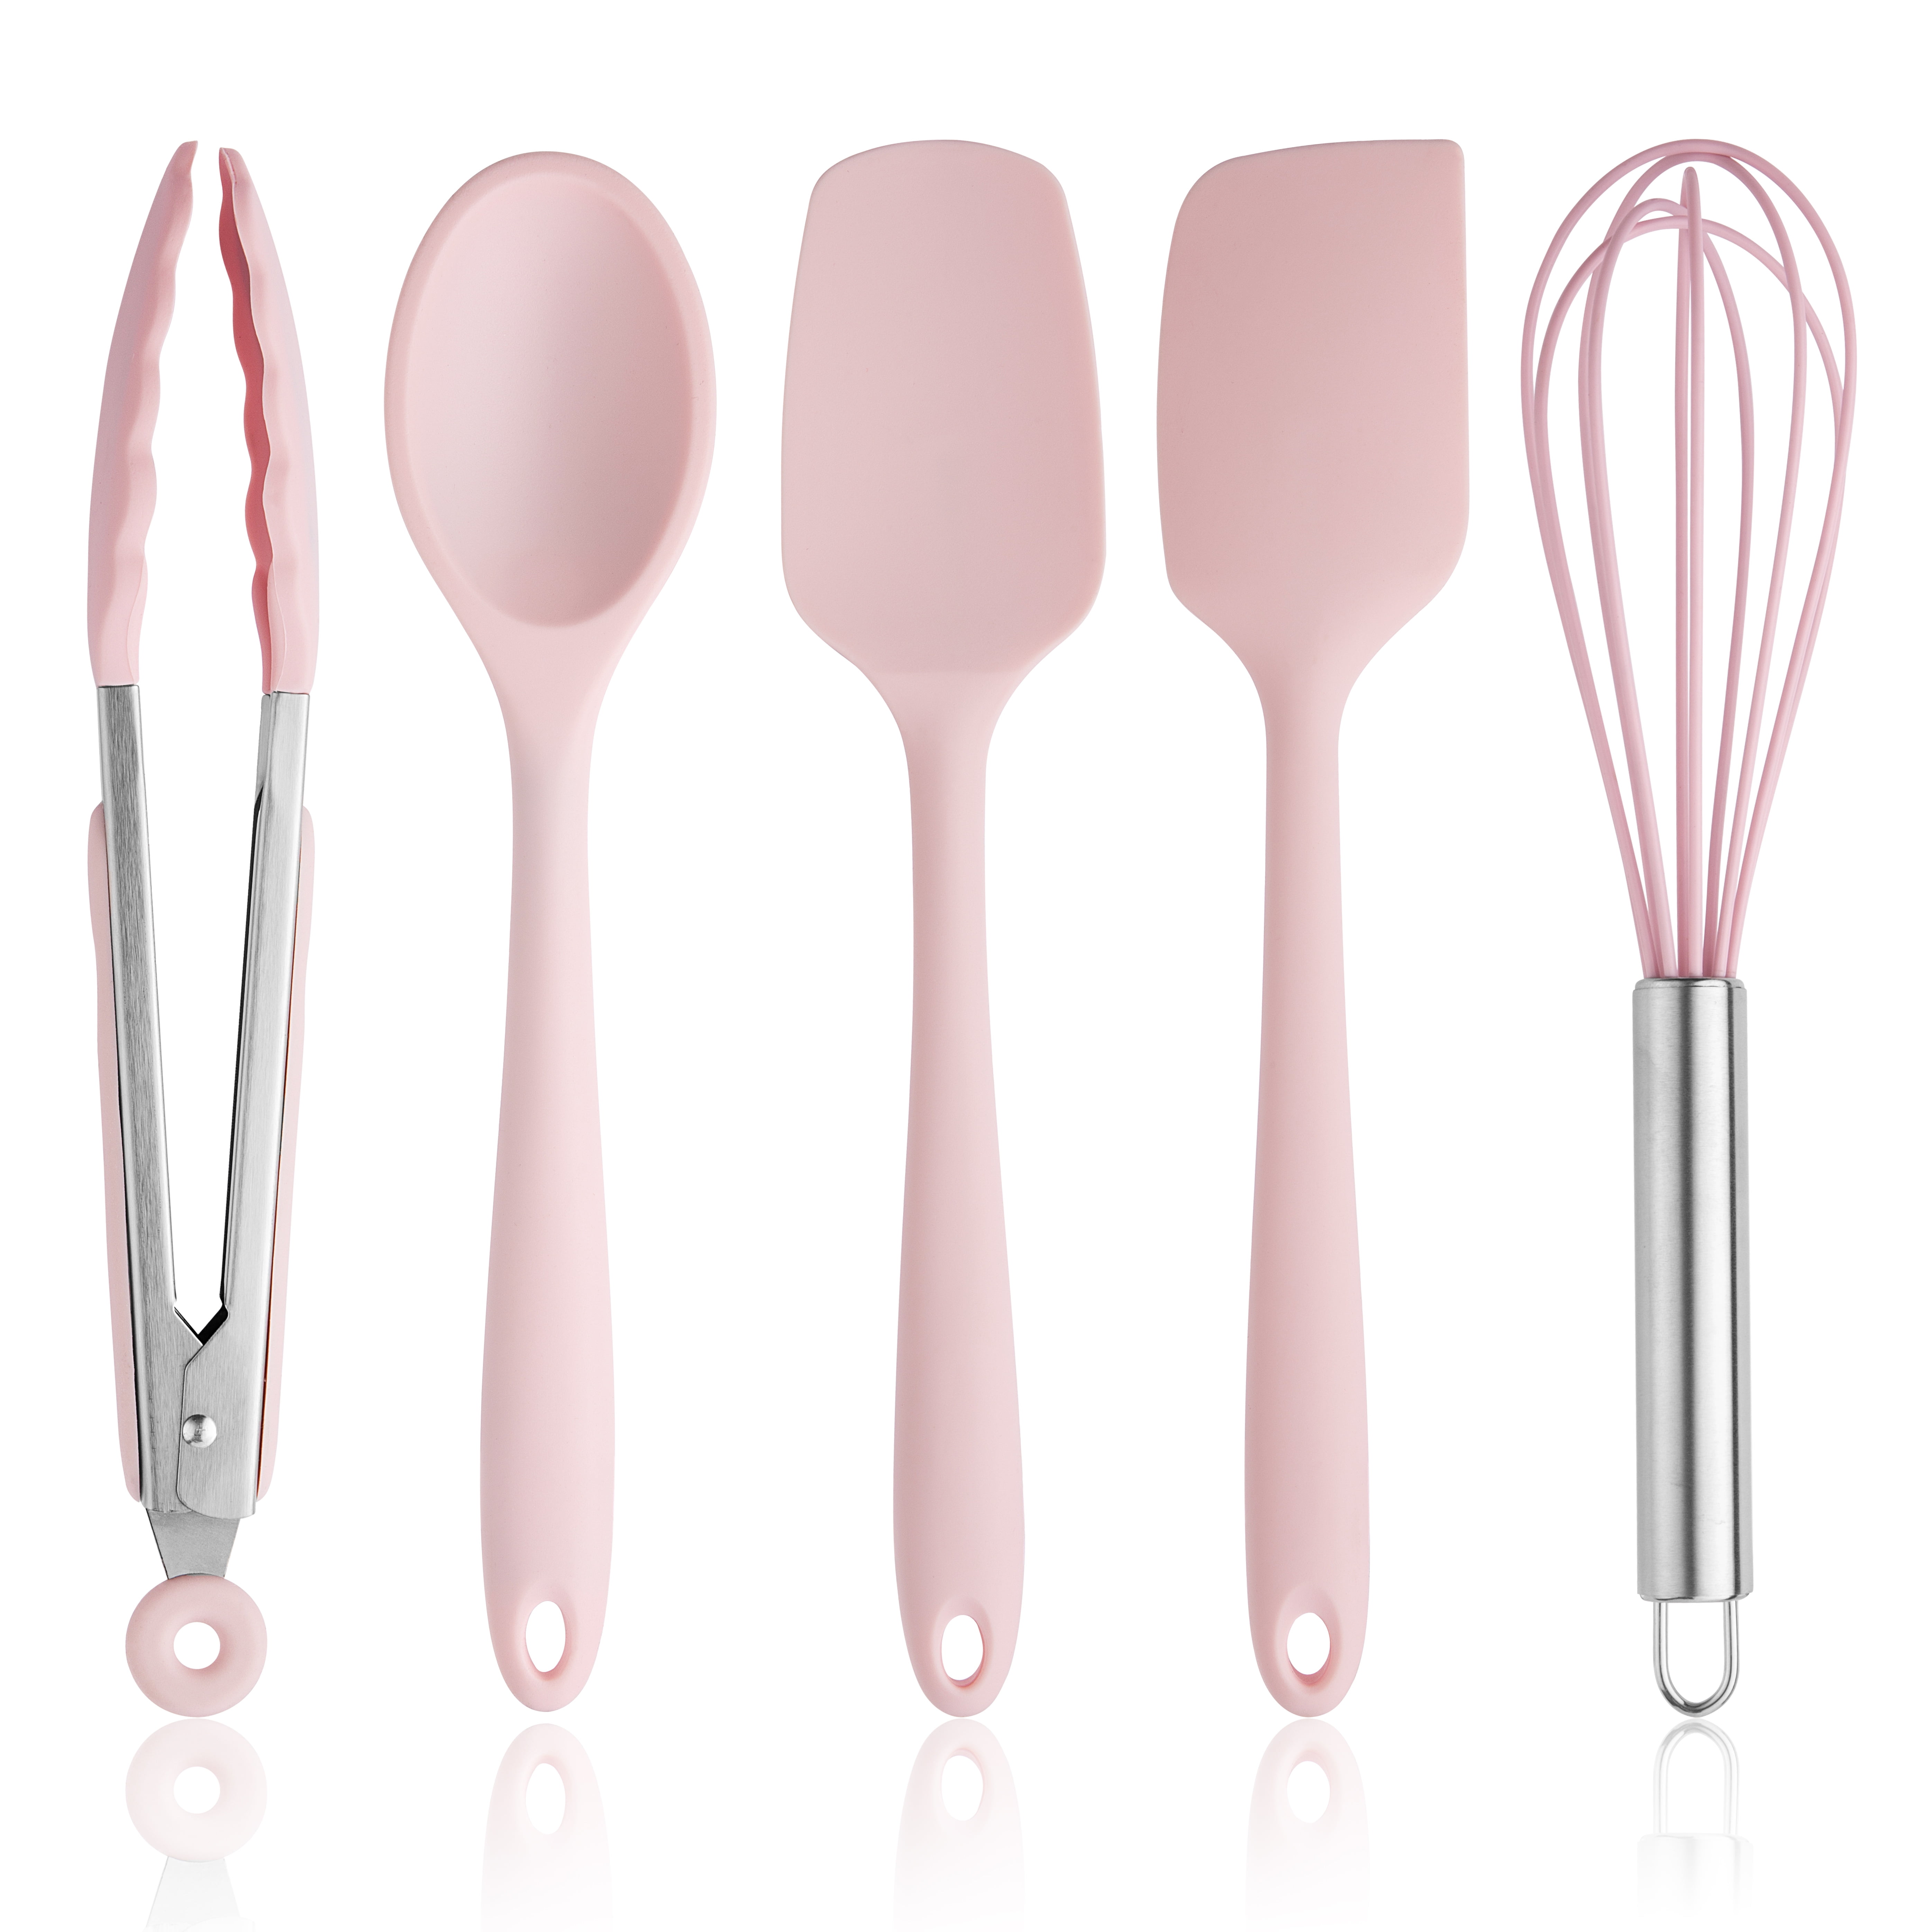 5 Piece Silicone Cooking Utensils Set, Seamless One-Piece Spatulas Set,  Silicone Brush and Whisk Set…See more 5 Piece Silicone Cooking Utensils  Set